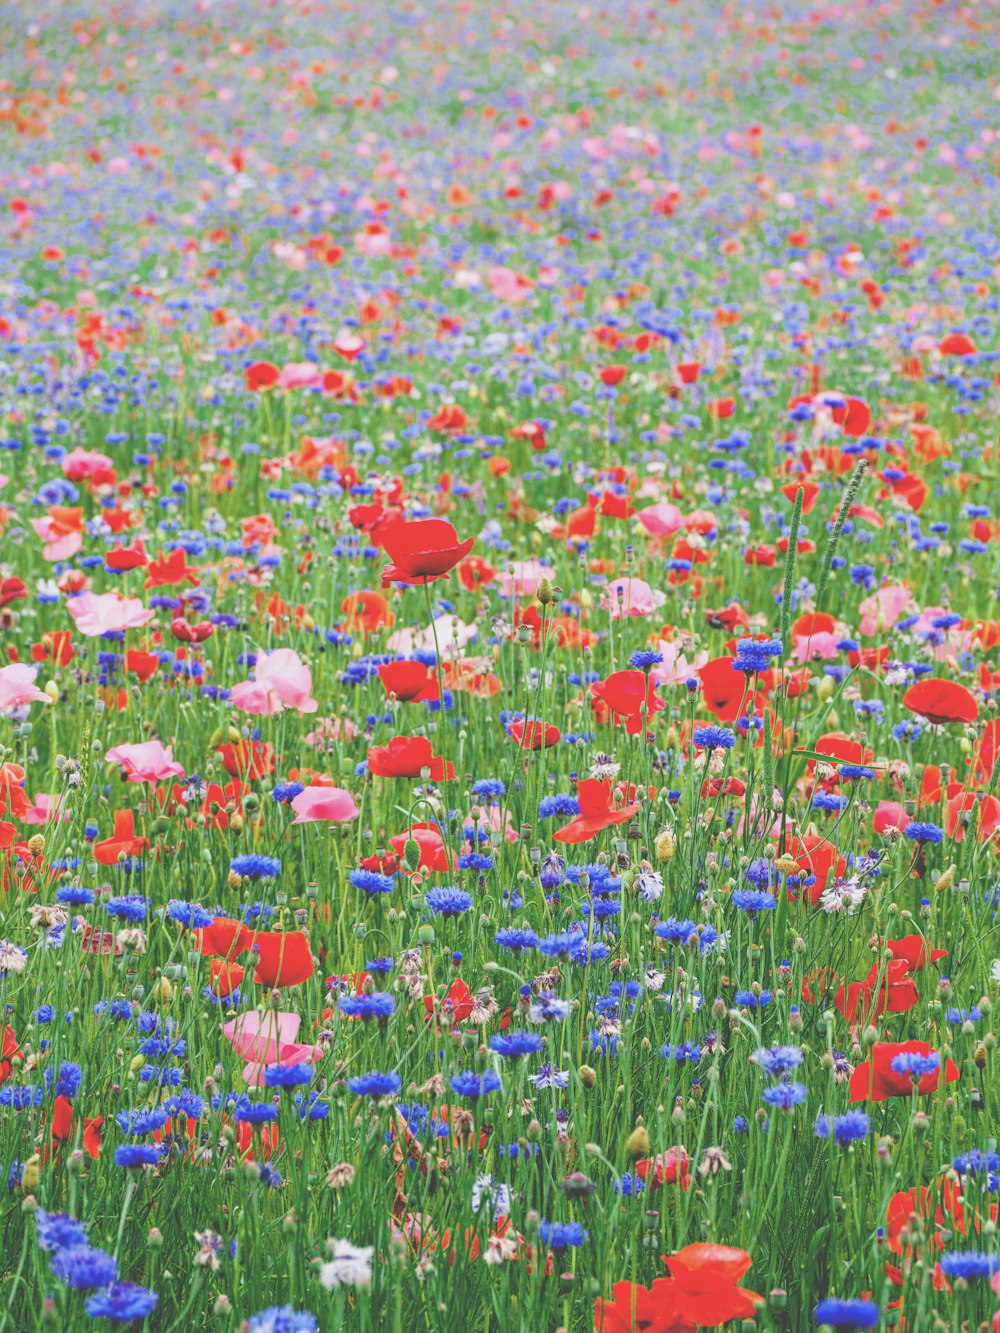 500 Flower Field Pictures Hd Download Free Images On Unsplash